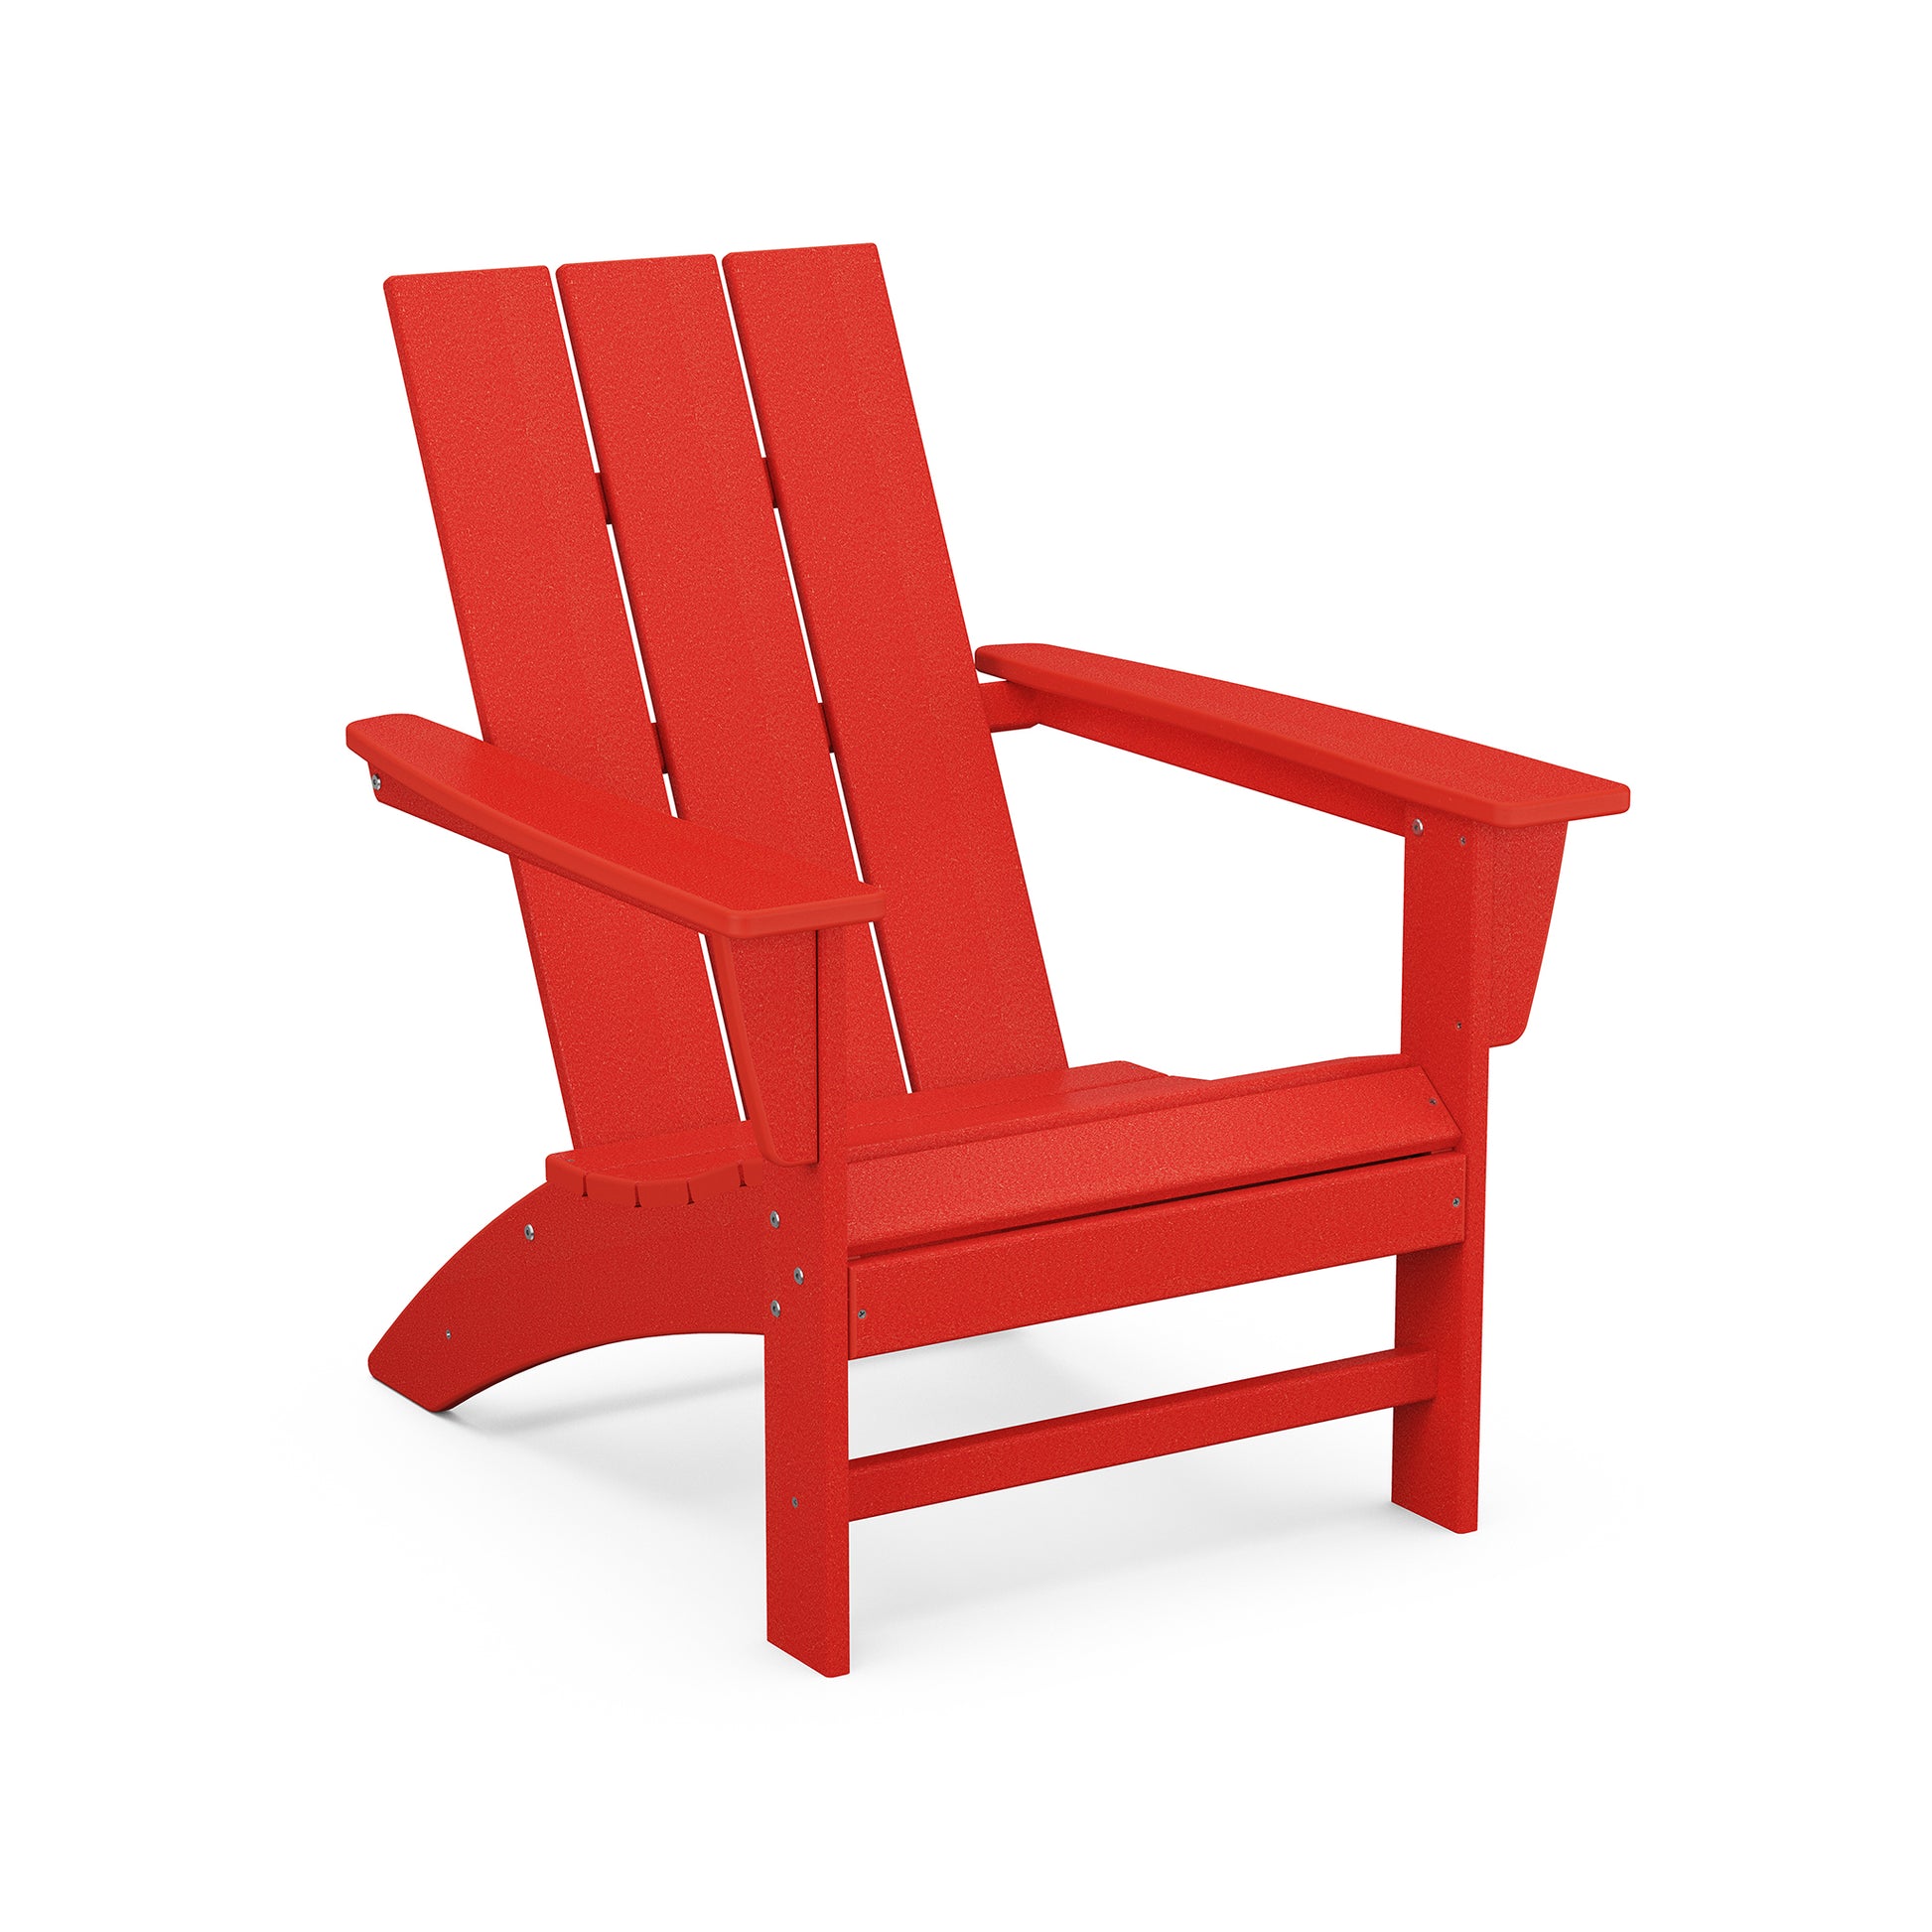 A red Modern Adirondack chair made of POLYWOOD® lumber on a white background.